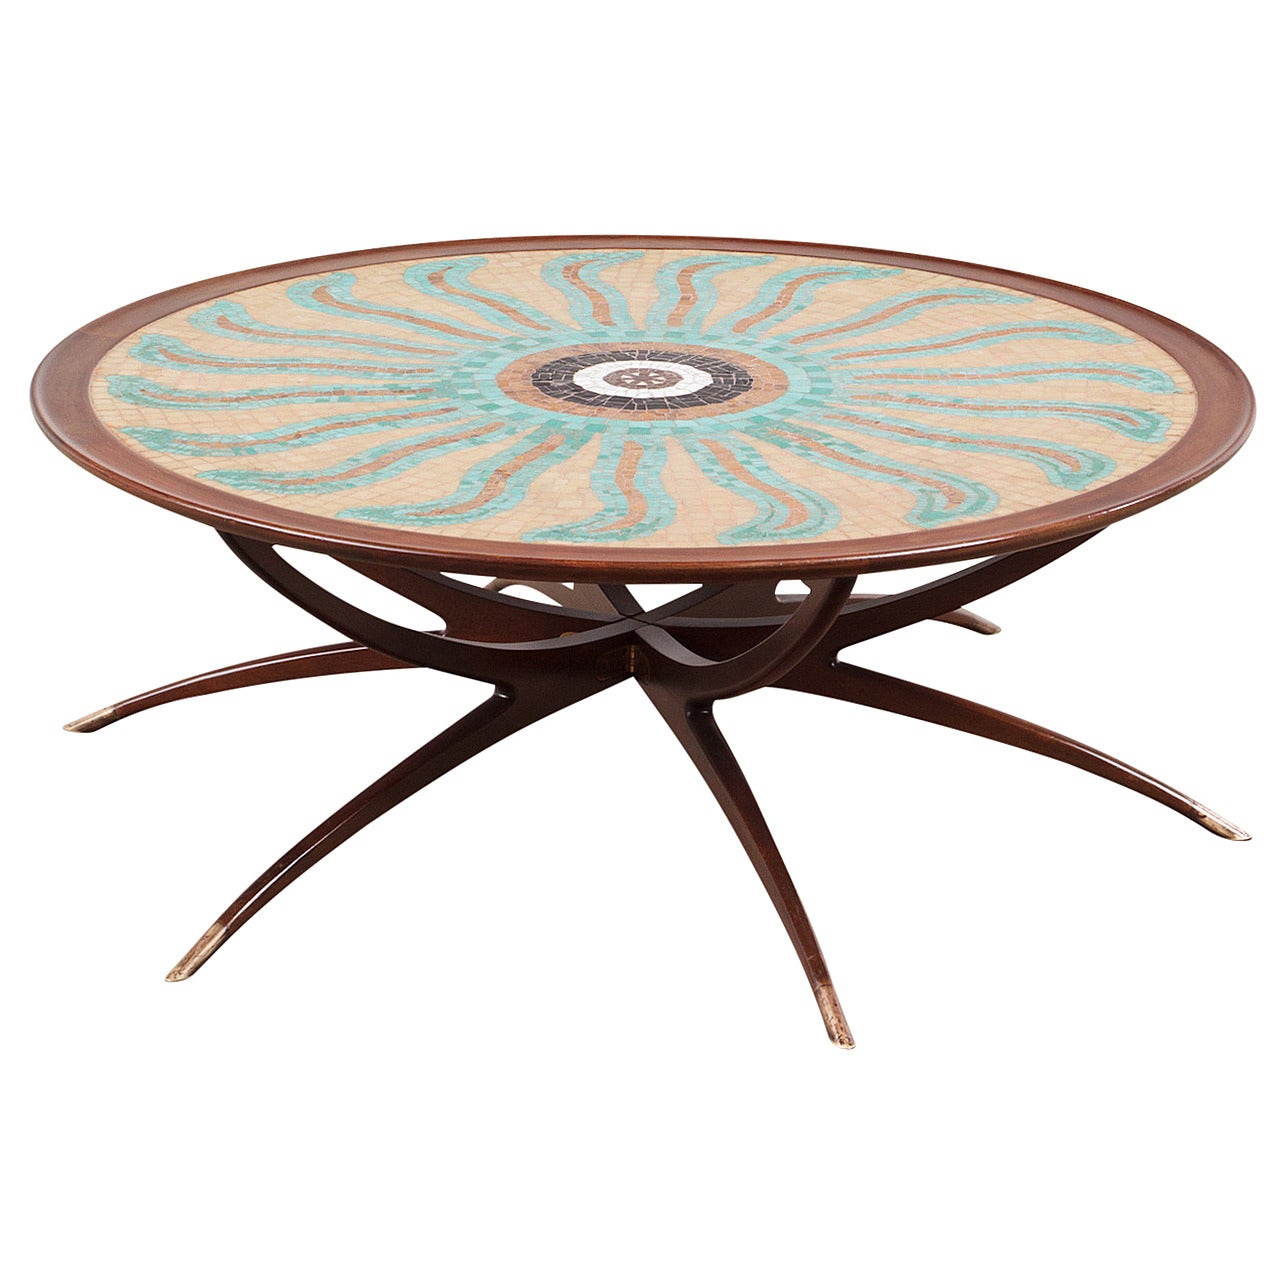 Mid Century Spider Table With Mosaic Tile Top